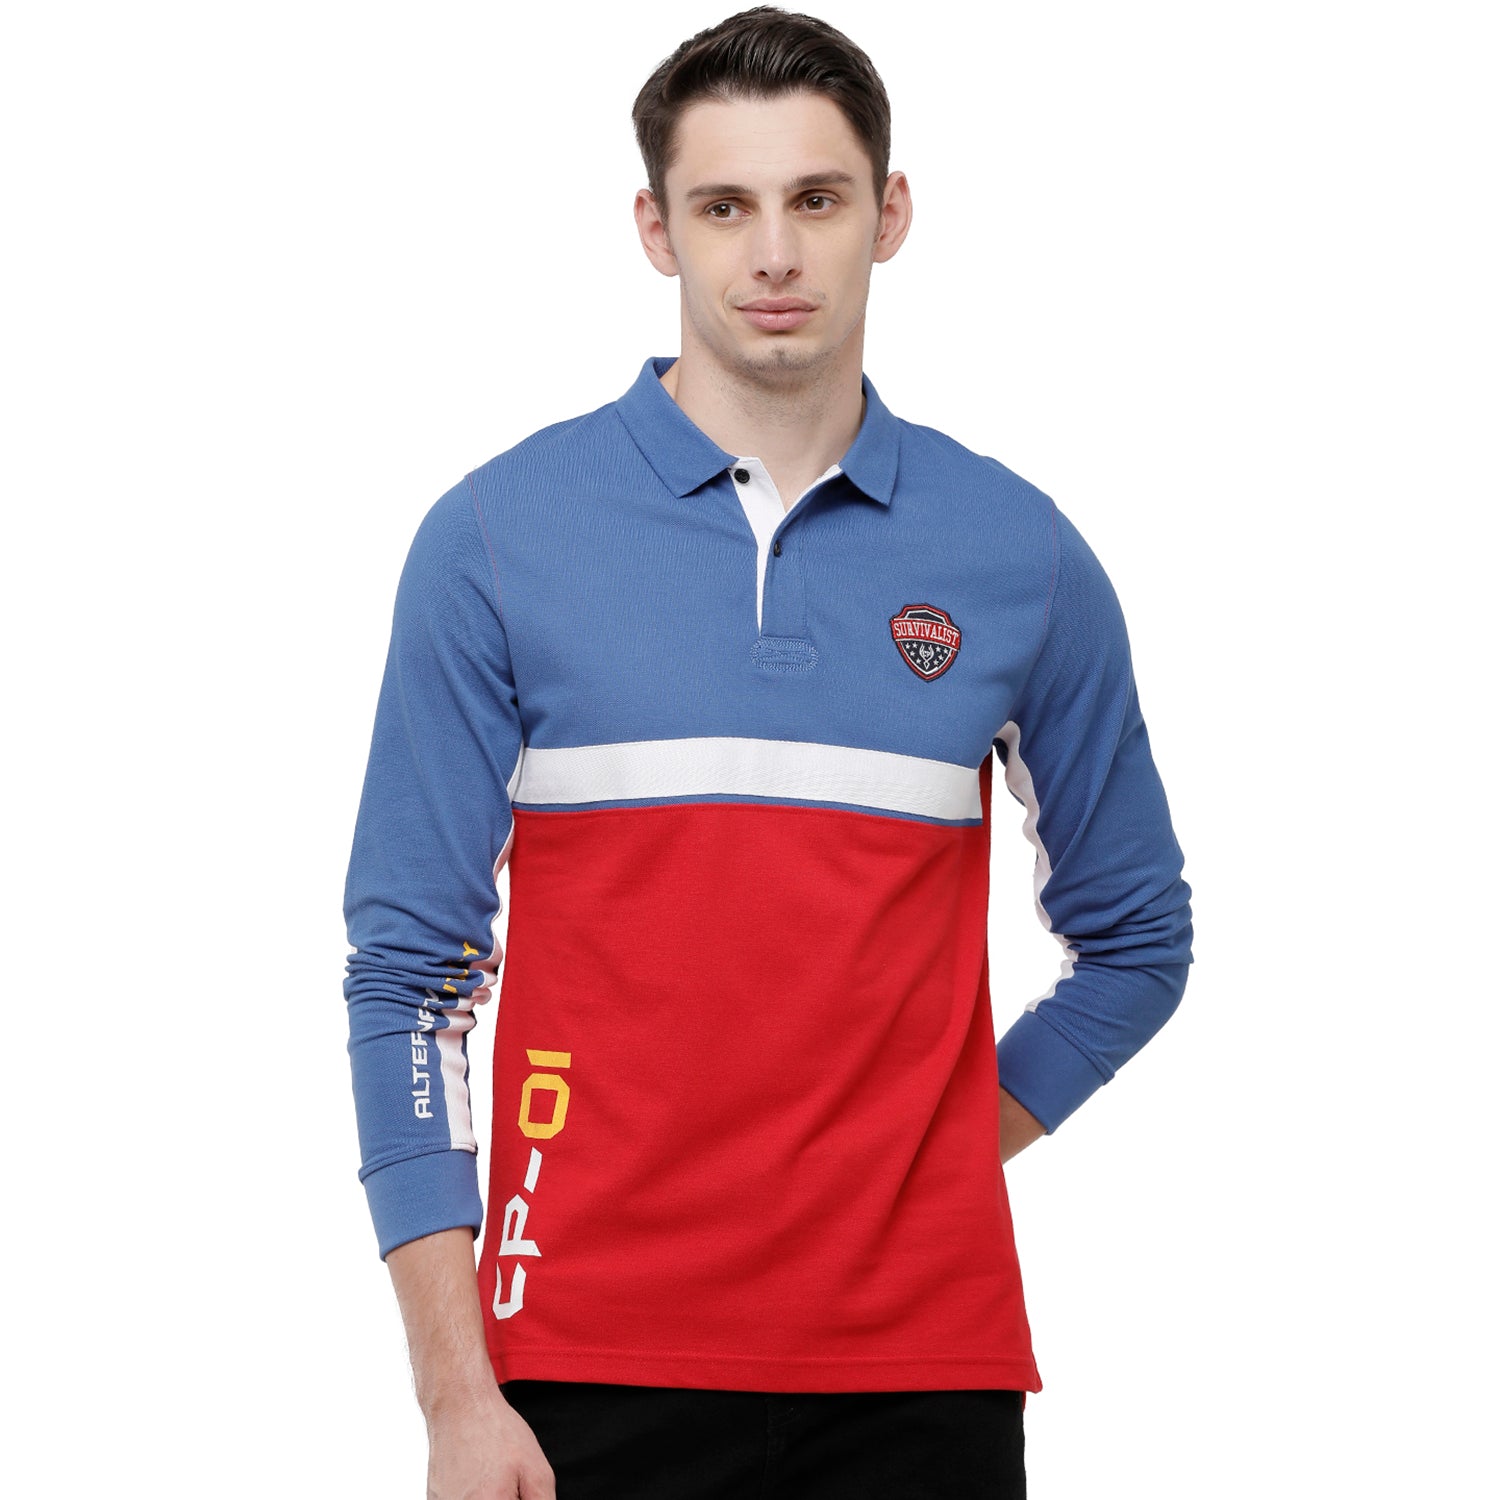 Classic Polo Men's Red & Blue Color Block Polo Full Sleeve Slim Fit T-Shirt - VERNO - 258 B SF P T-shirt Classic Polo 